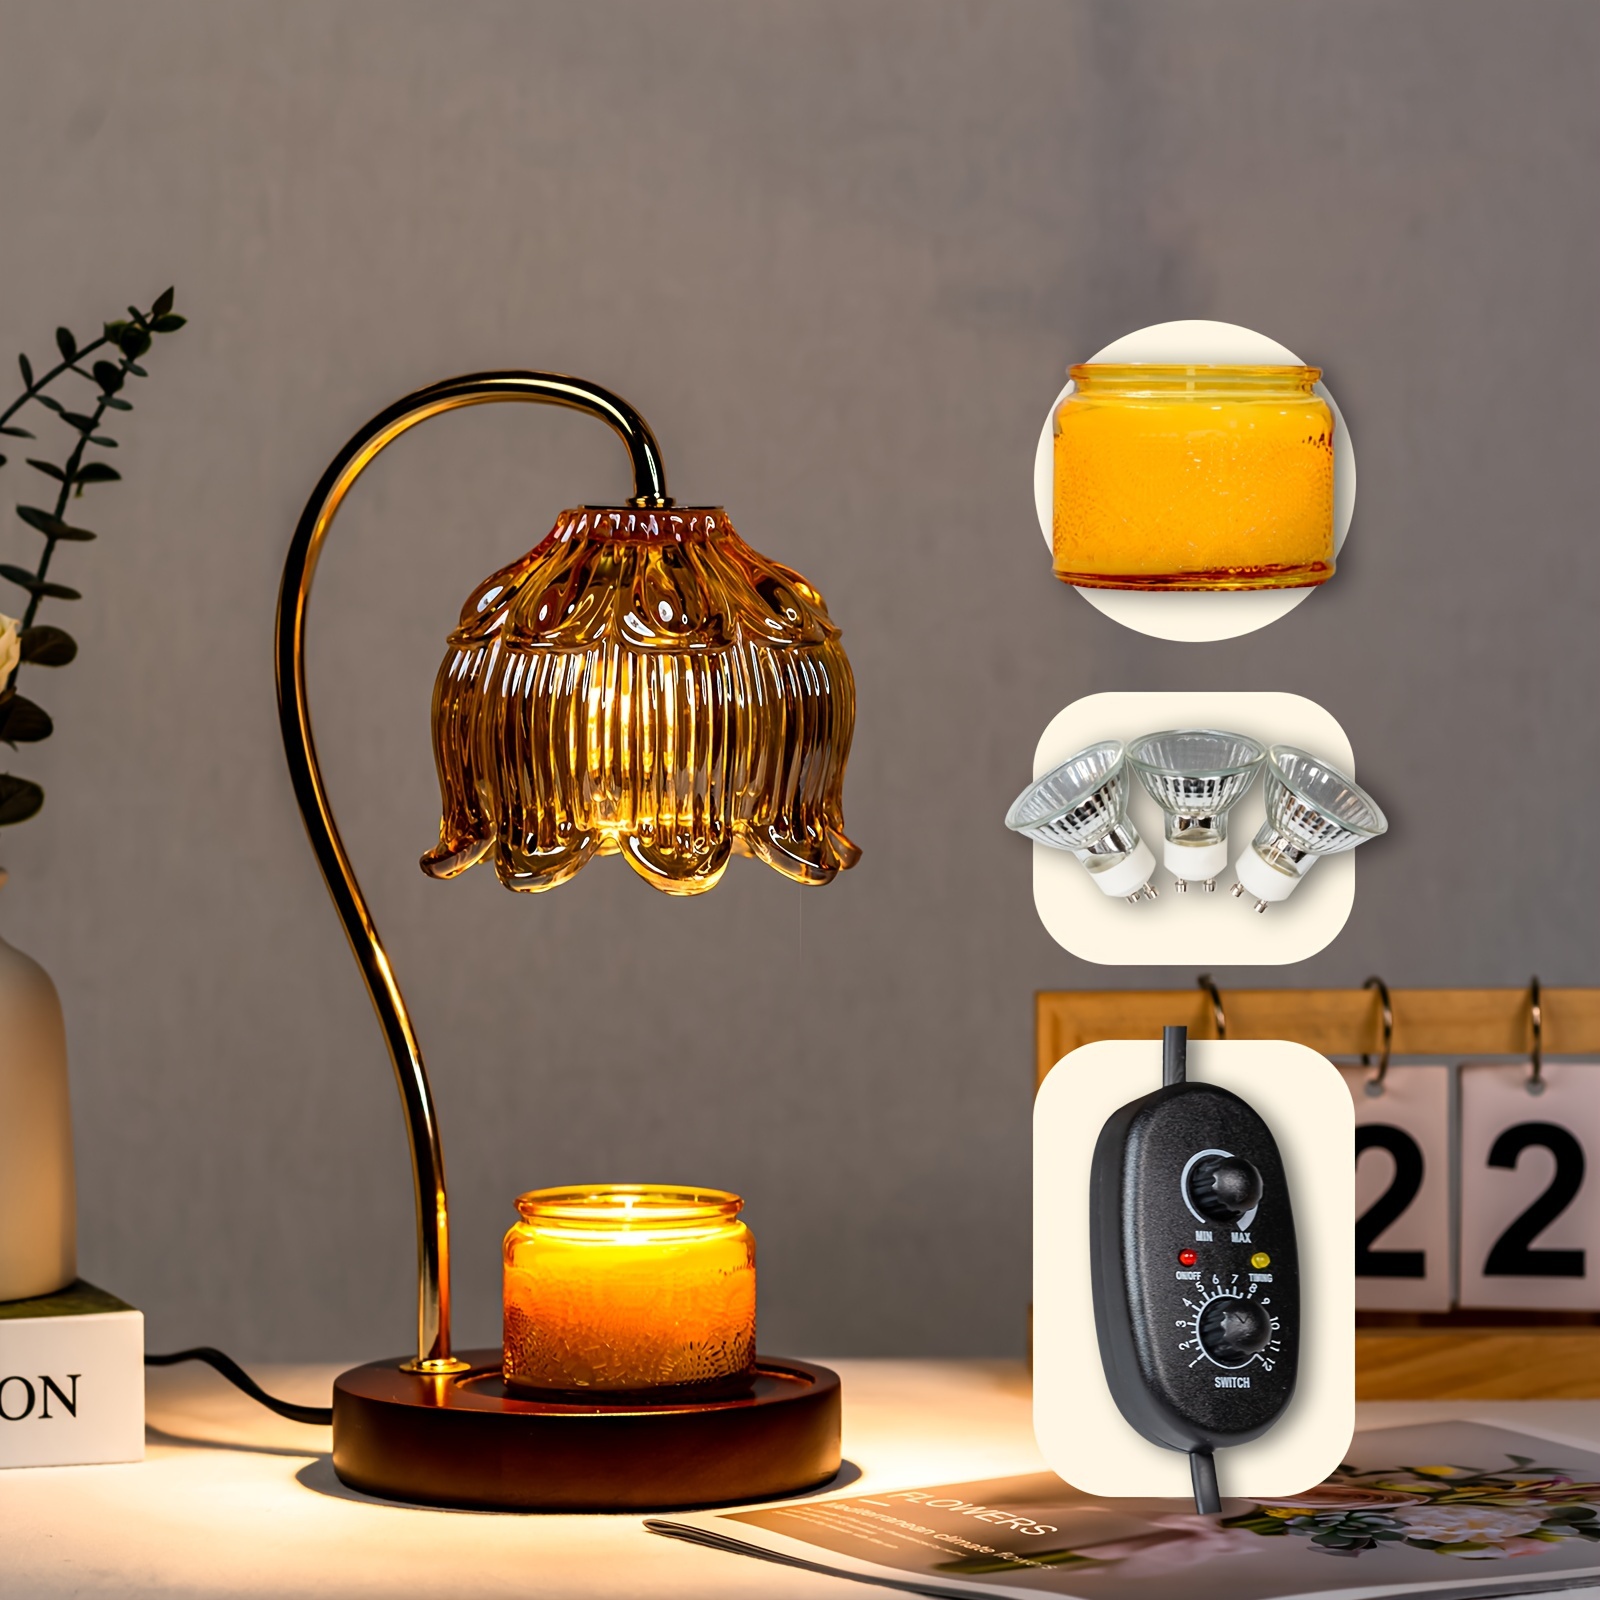 

Flower Candle Warmer Lamp With Timer, Electric Candle Warmer Lamp, Birthday Gifts For Women, Mom, Female Friend, Glass Candle Lamp Warmer Gifts, Aromatic Candle Warmer For Vintage Home Decor